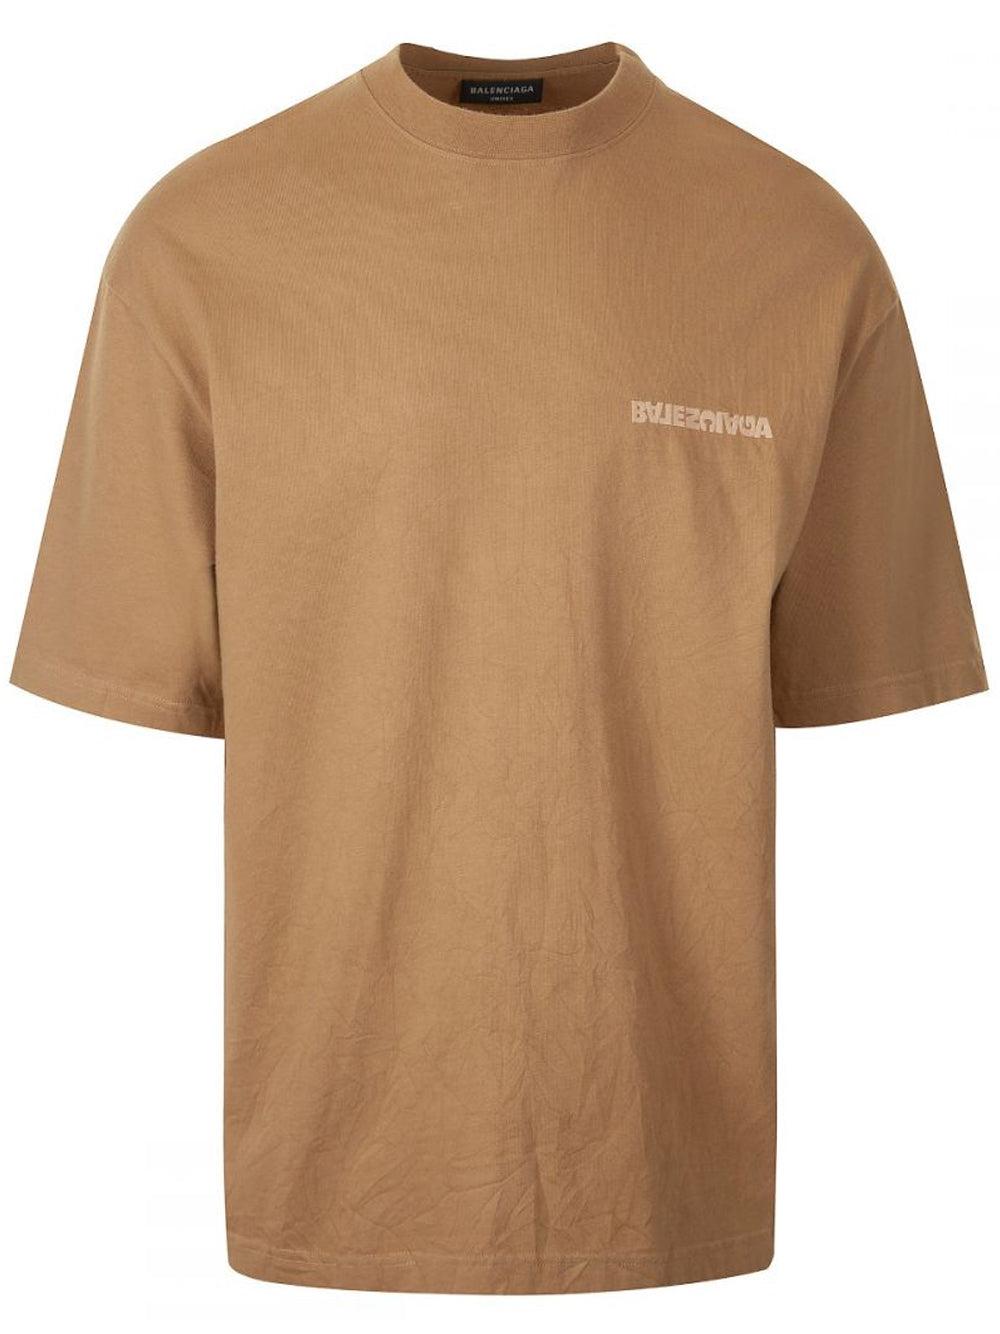 Balenciaga Cotton Turn Logo Creased T-shirt Oat in Brown for Men - Save 6%  | Lyst